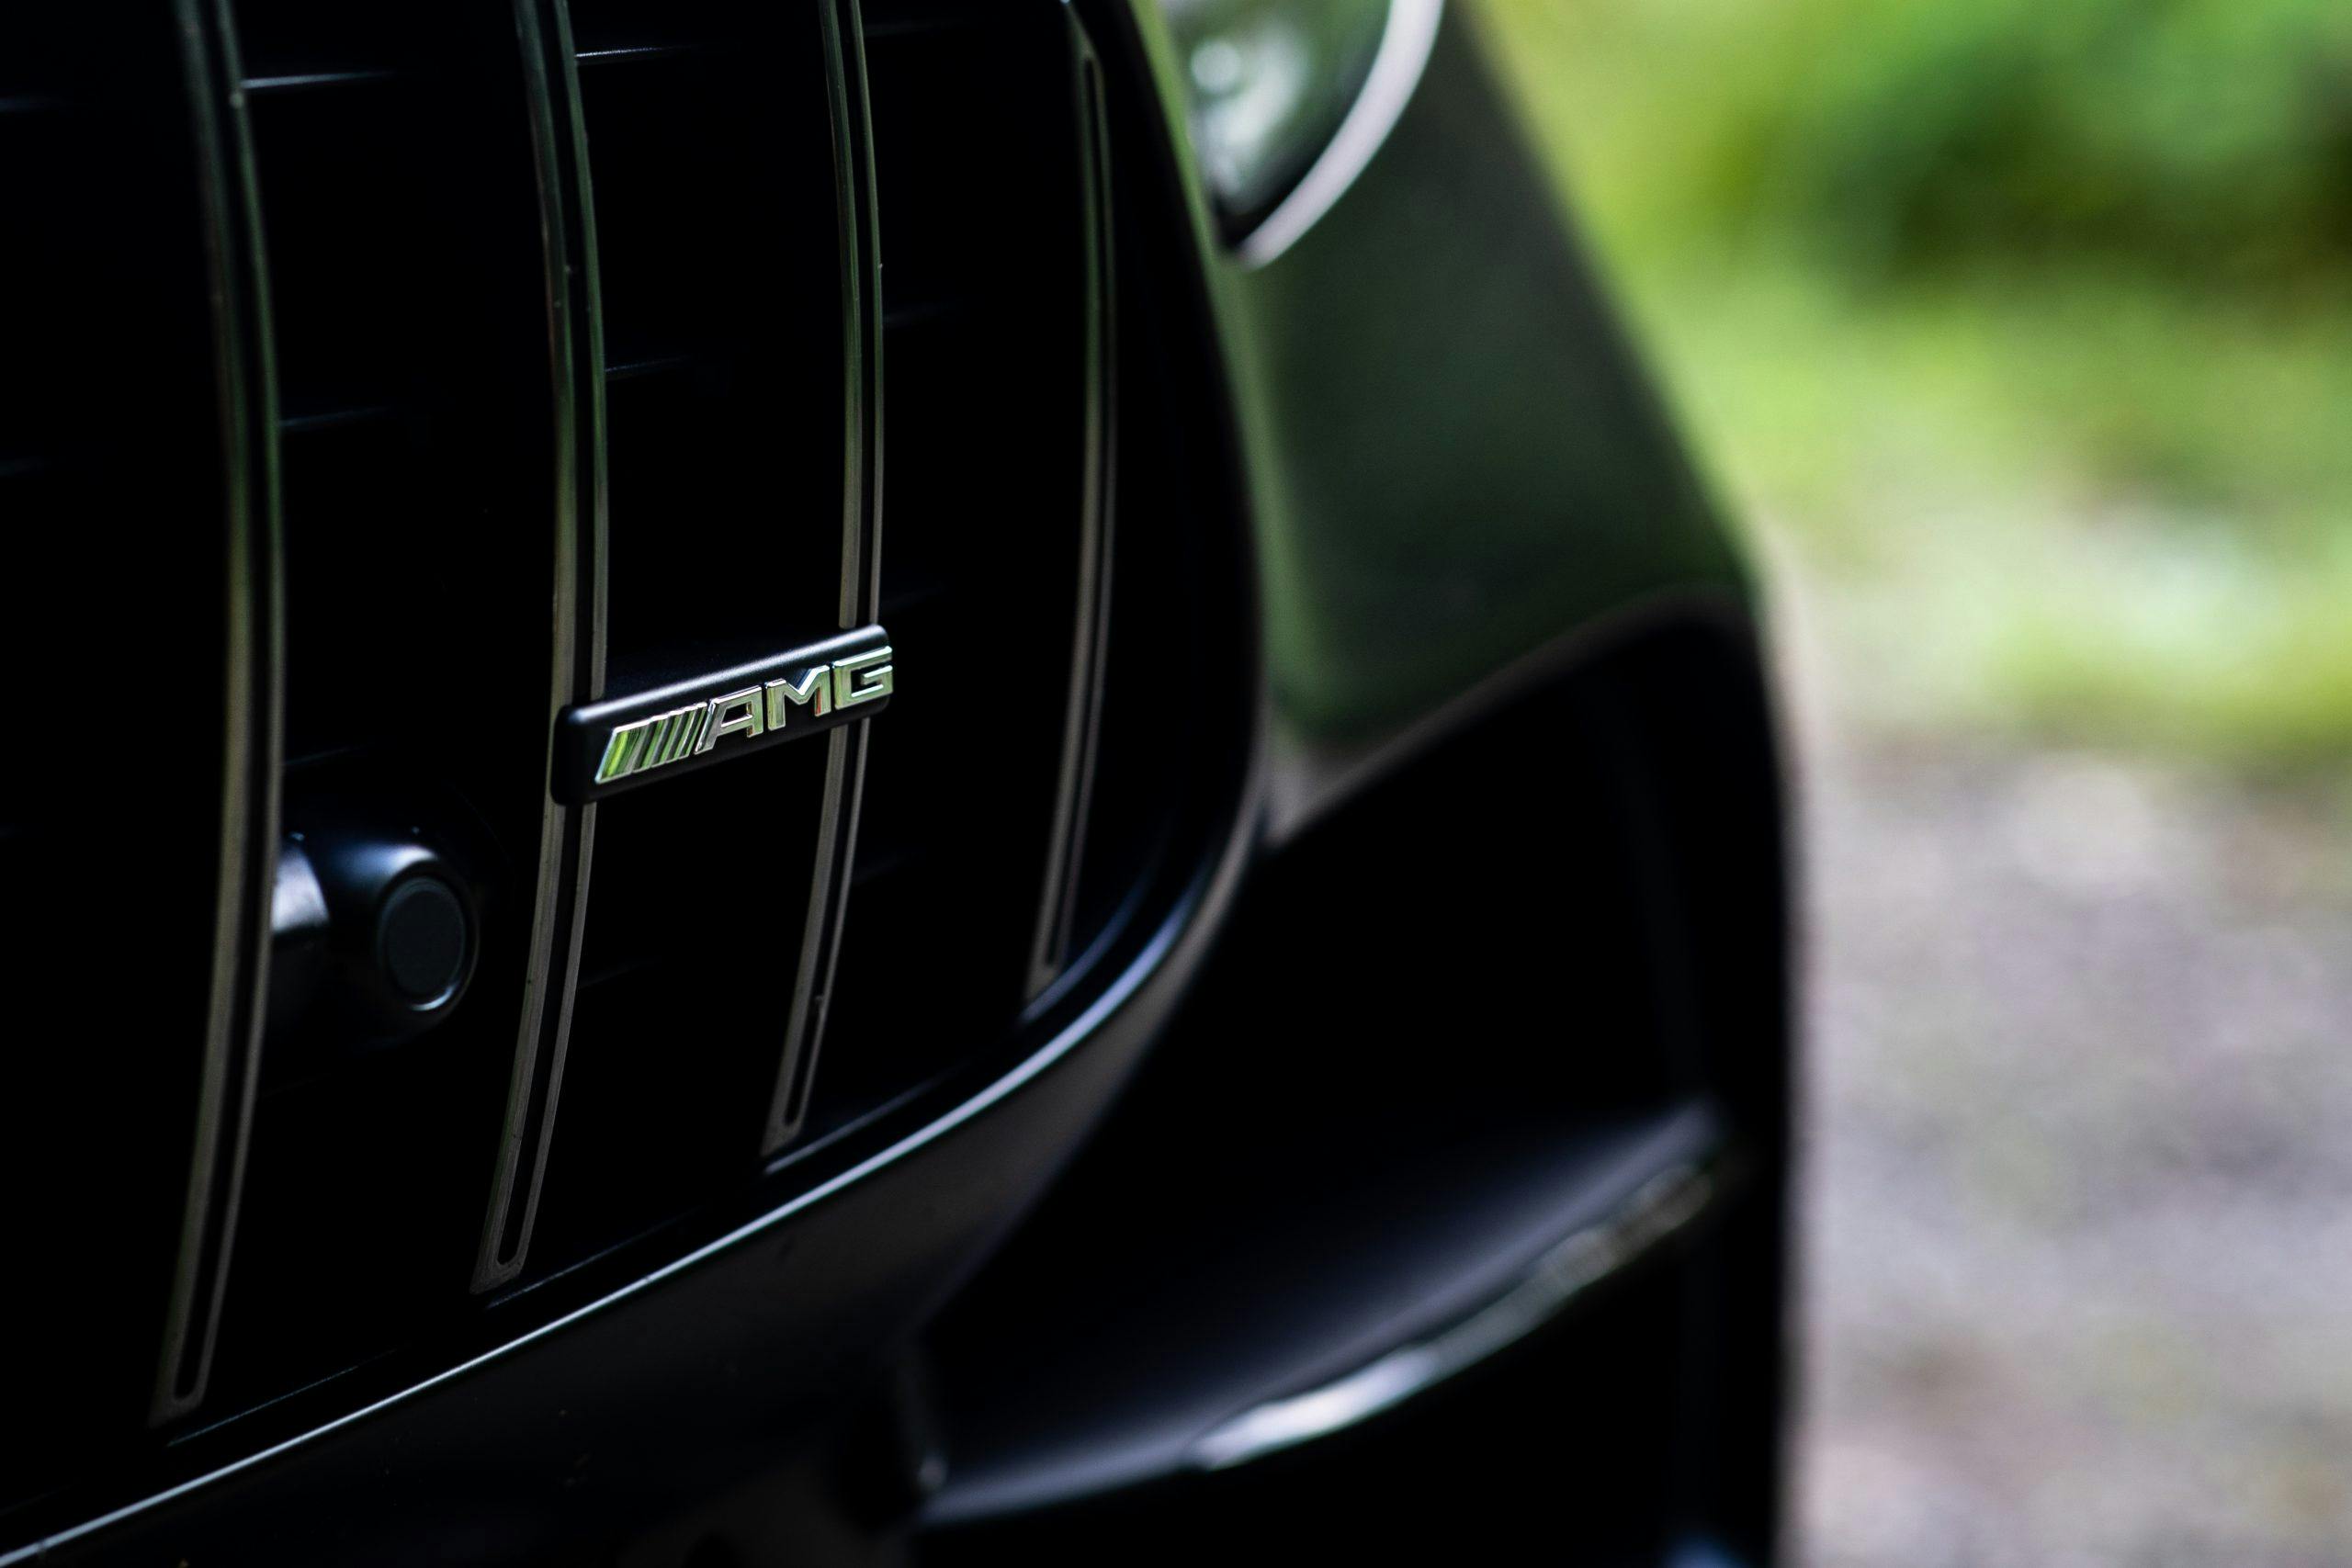 2021 Mercedes-AMG GT Stealth Edition grille badge detail